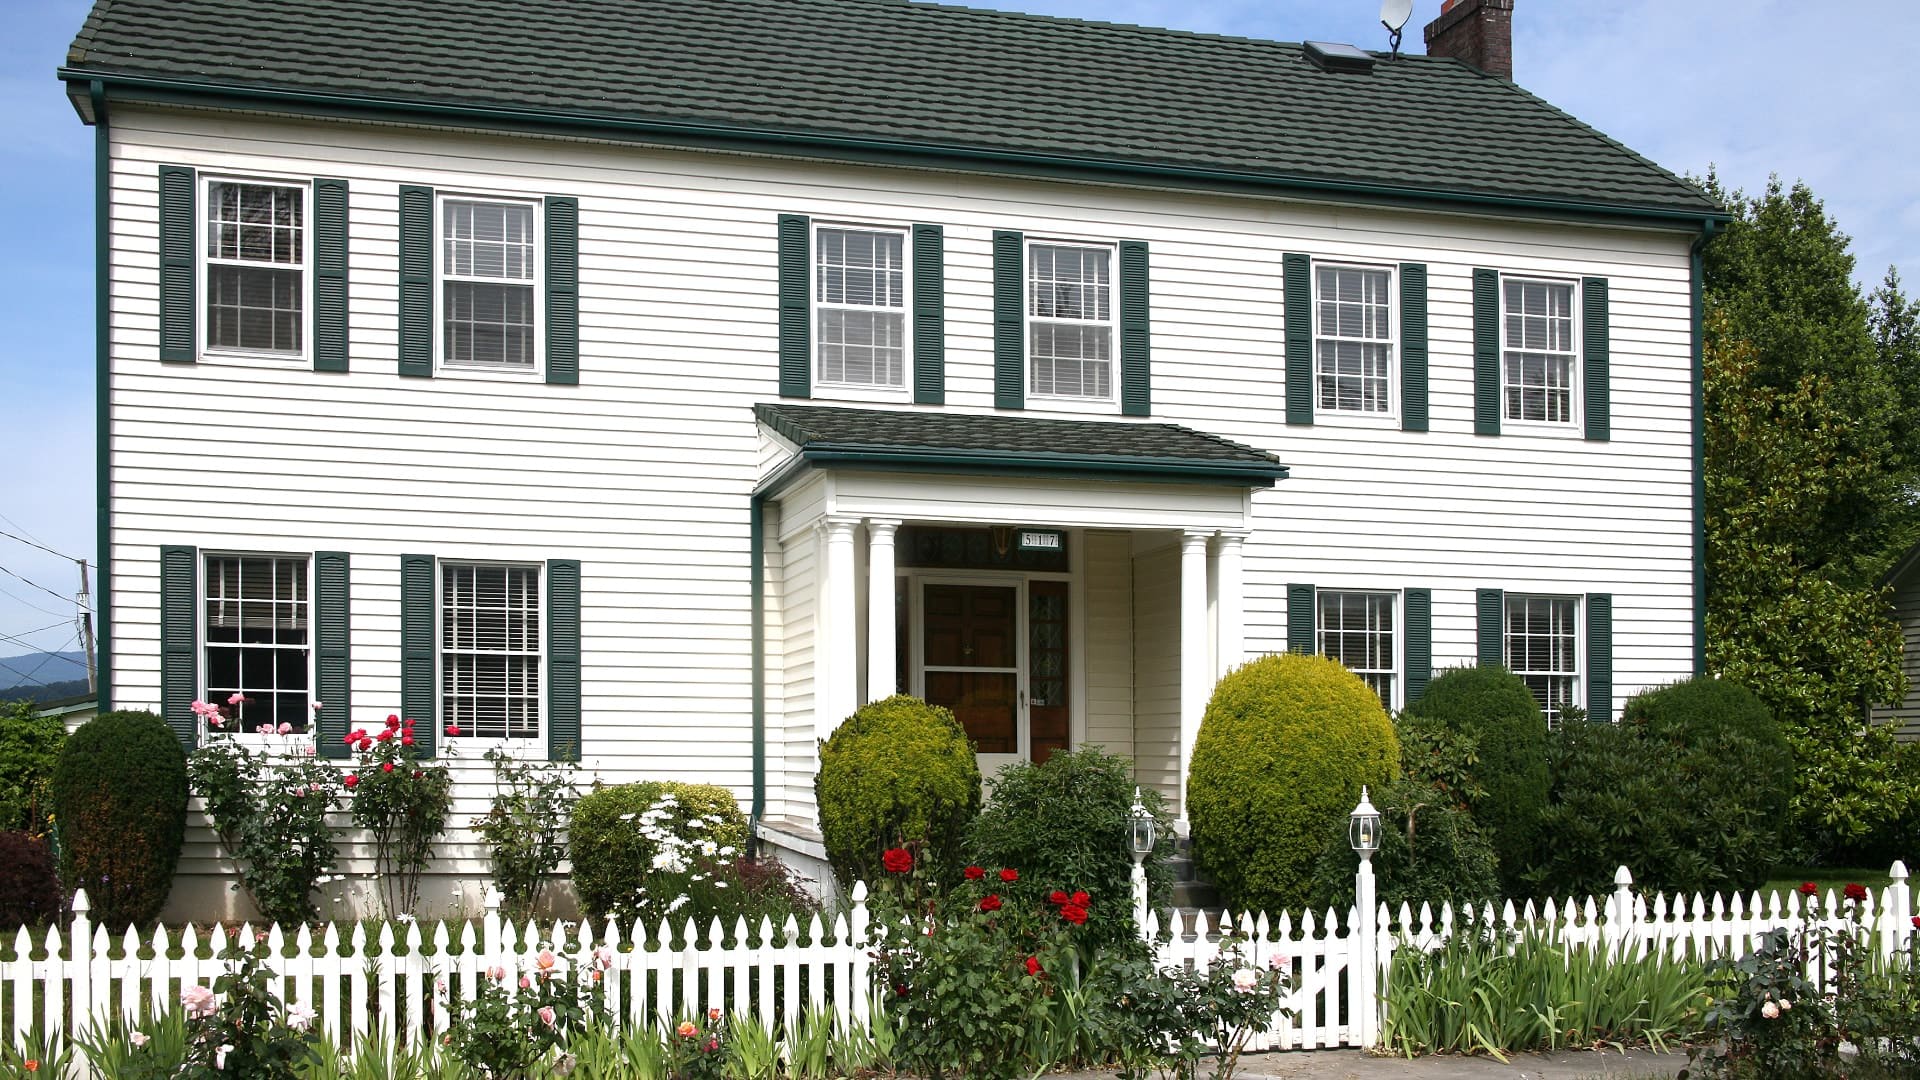 Exterior view of property painted white with green trim and shutters surrounded by green shrubs, bushes, flowers, and white picket fence